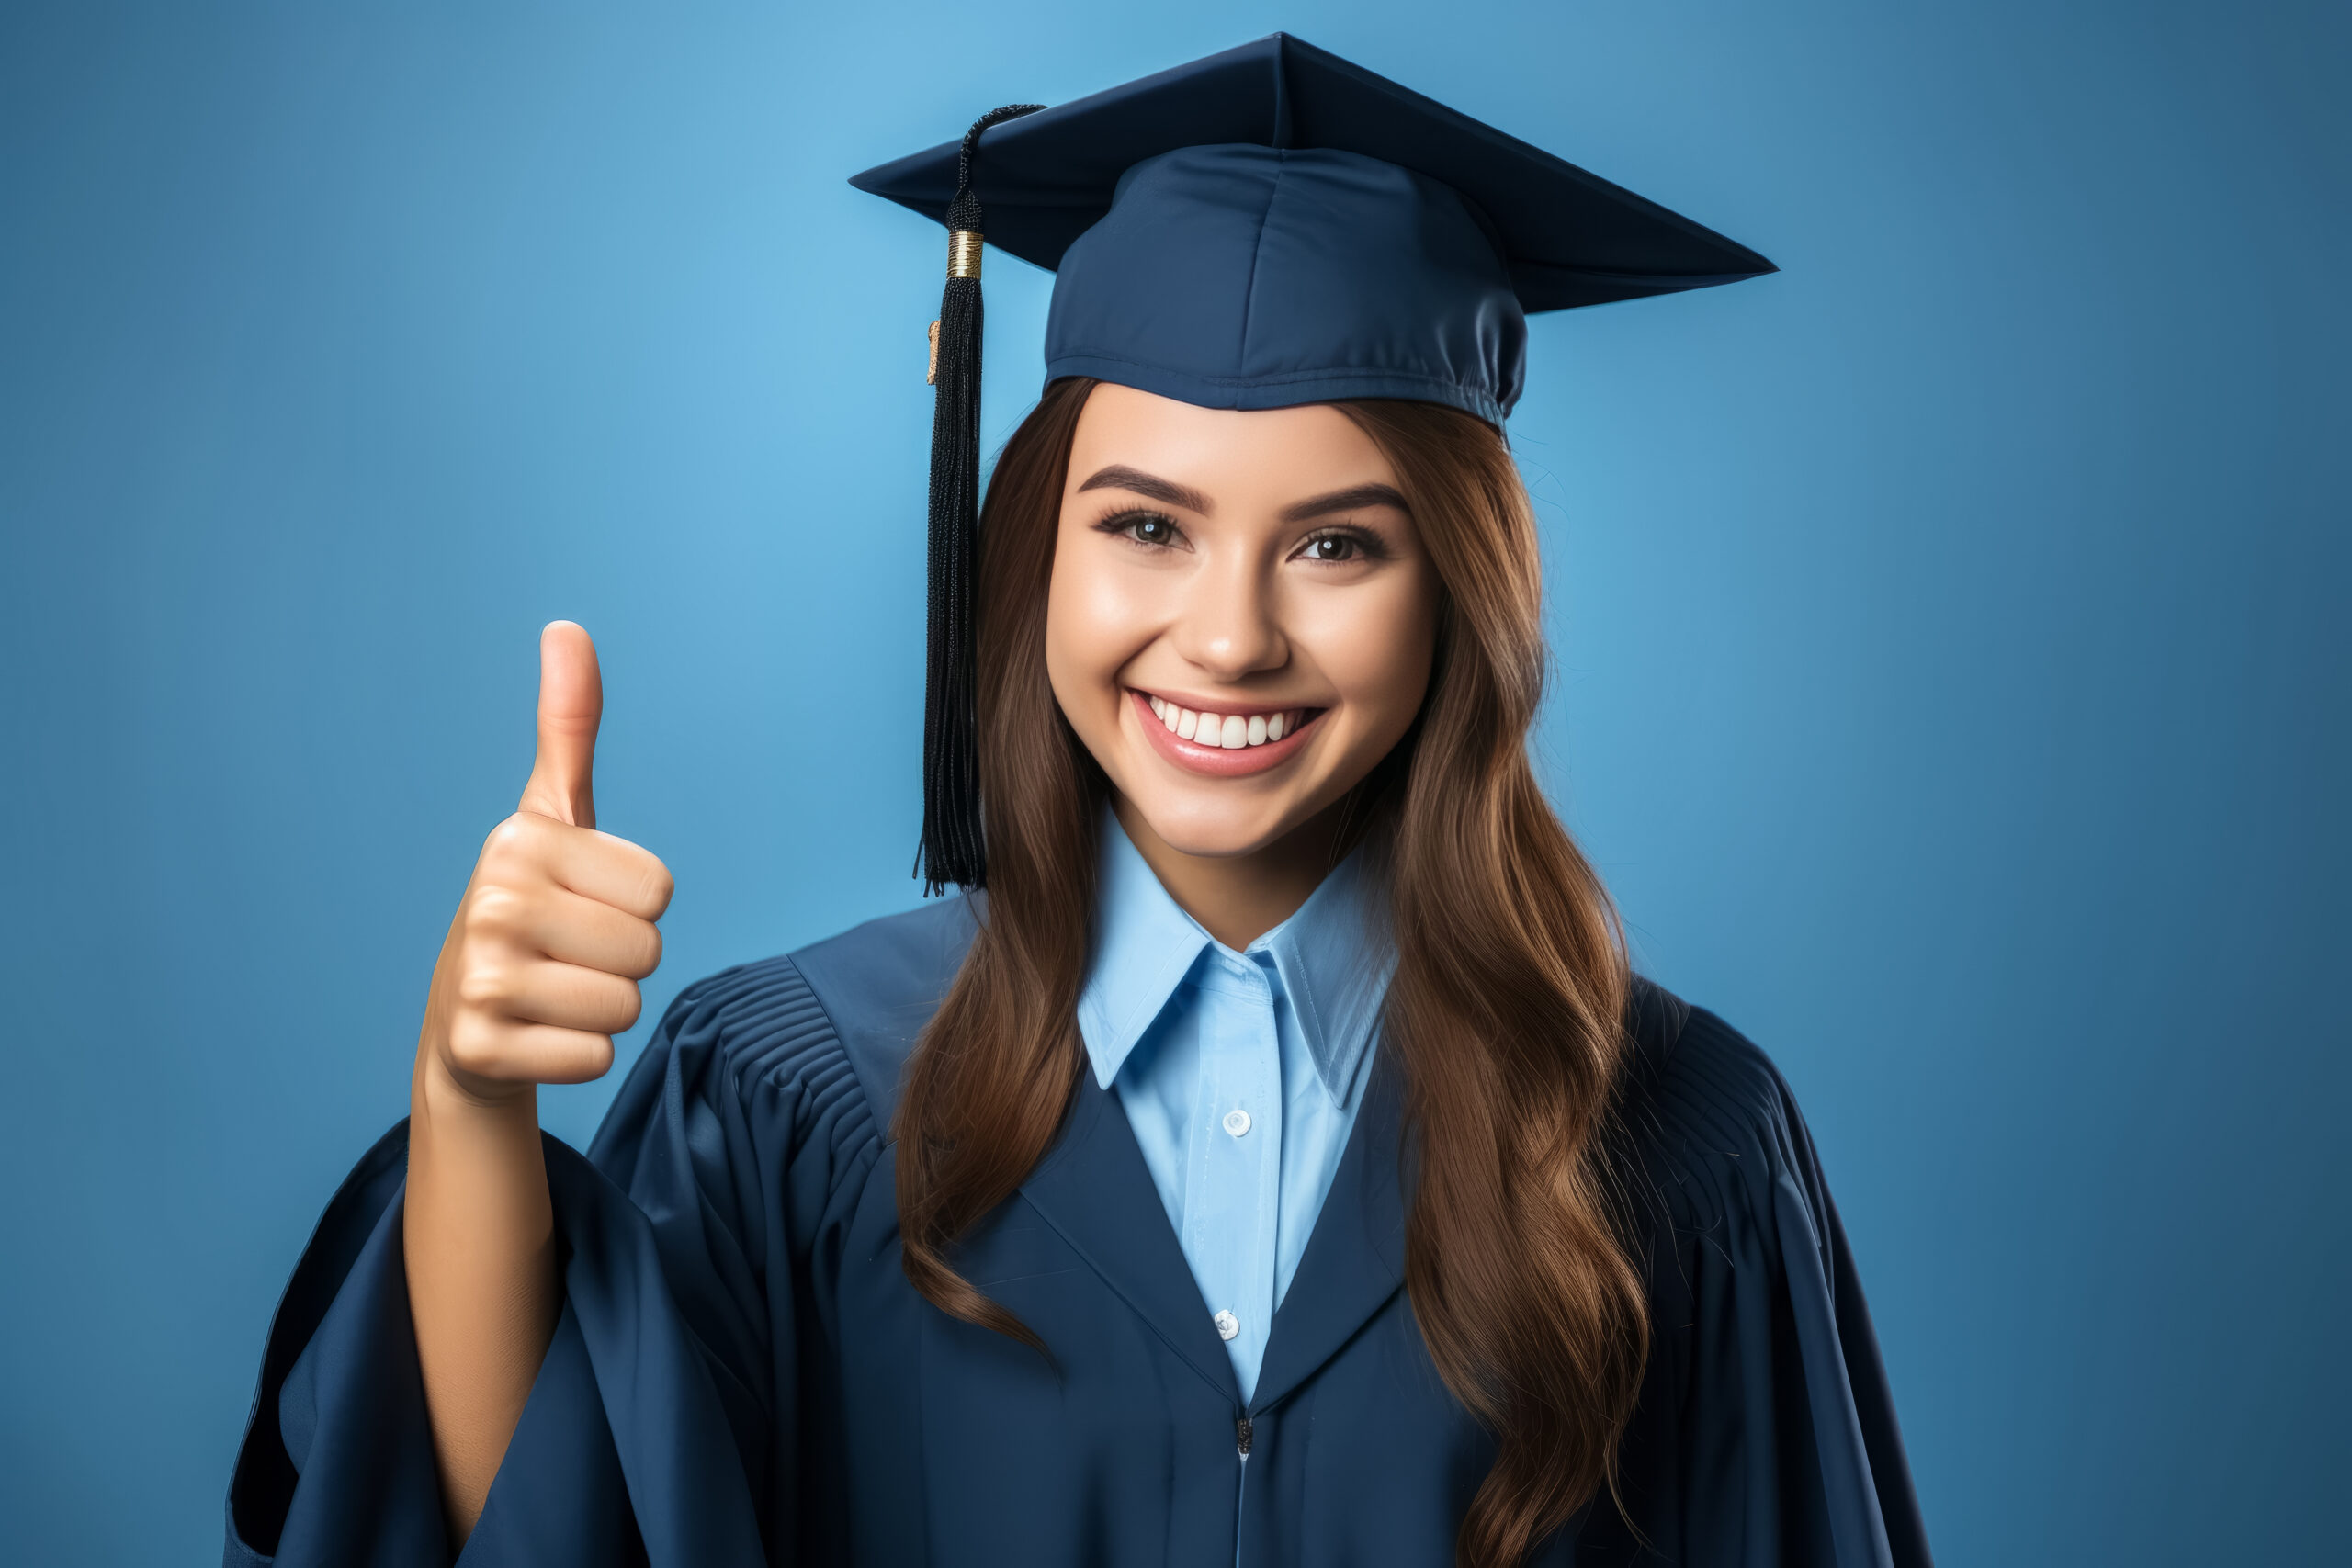 Student Girl Wearing Graduated Cap And Uniform Doing Happy Thumbs Up Gesture With Hand. Copy Space